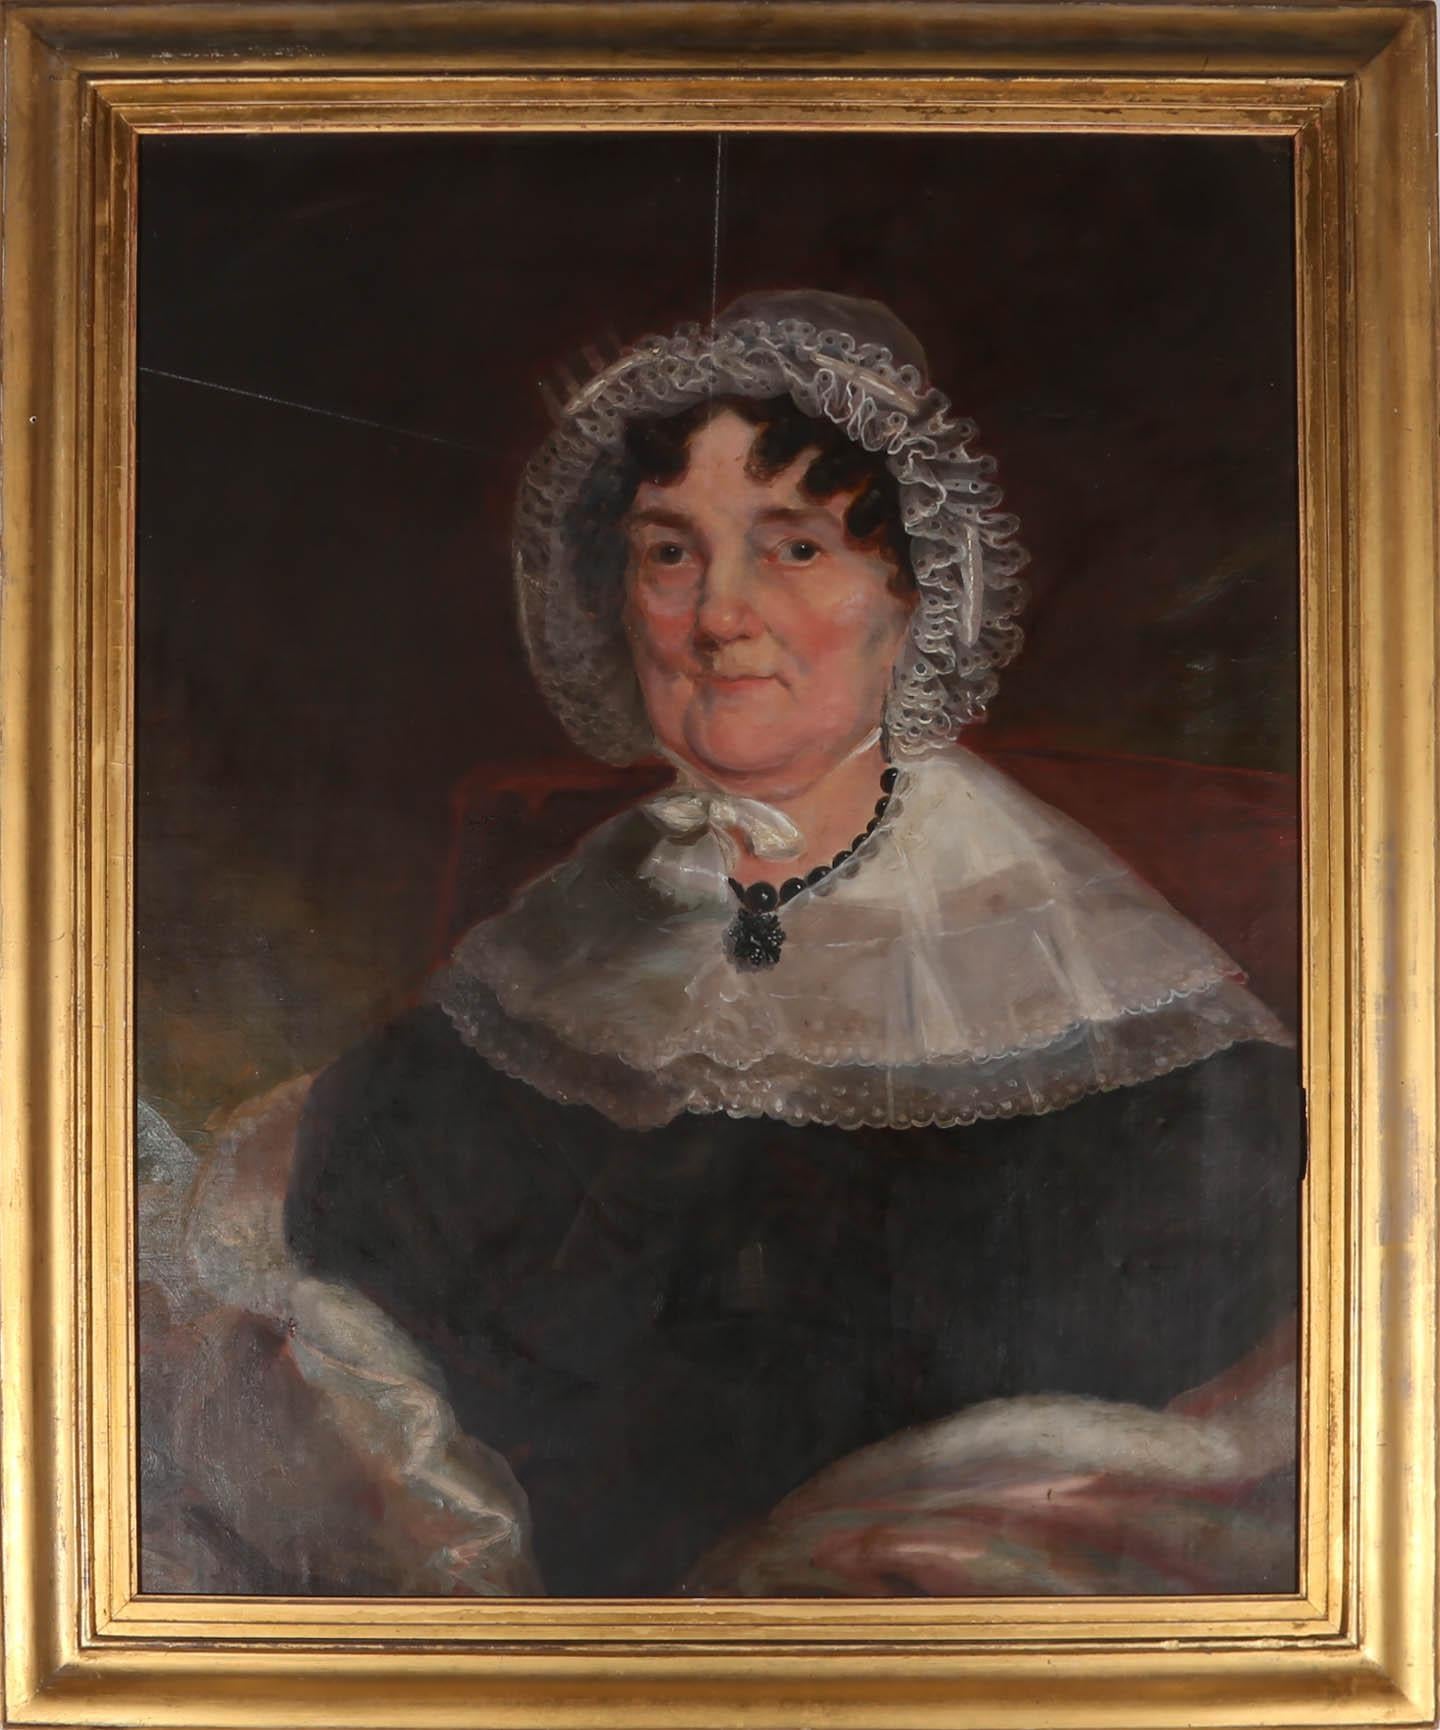 Unknown Portrait Painting - Mid 19th Century Oil - The Matron